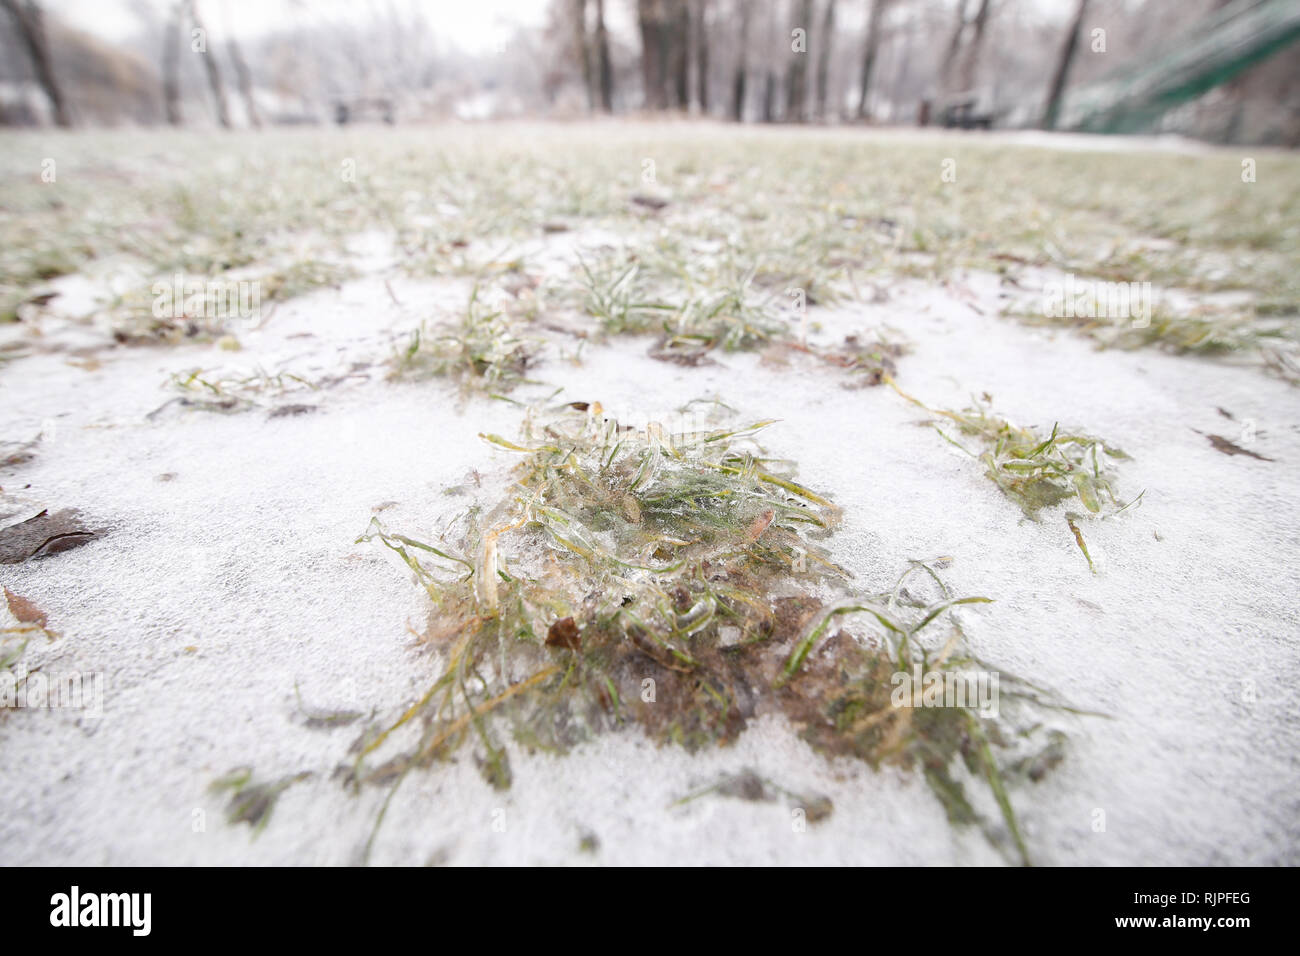 Frozen ground and vegetation during winter after a freezing rain weather phenomenon Stock Photo